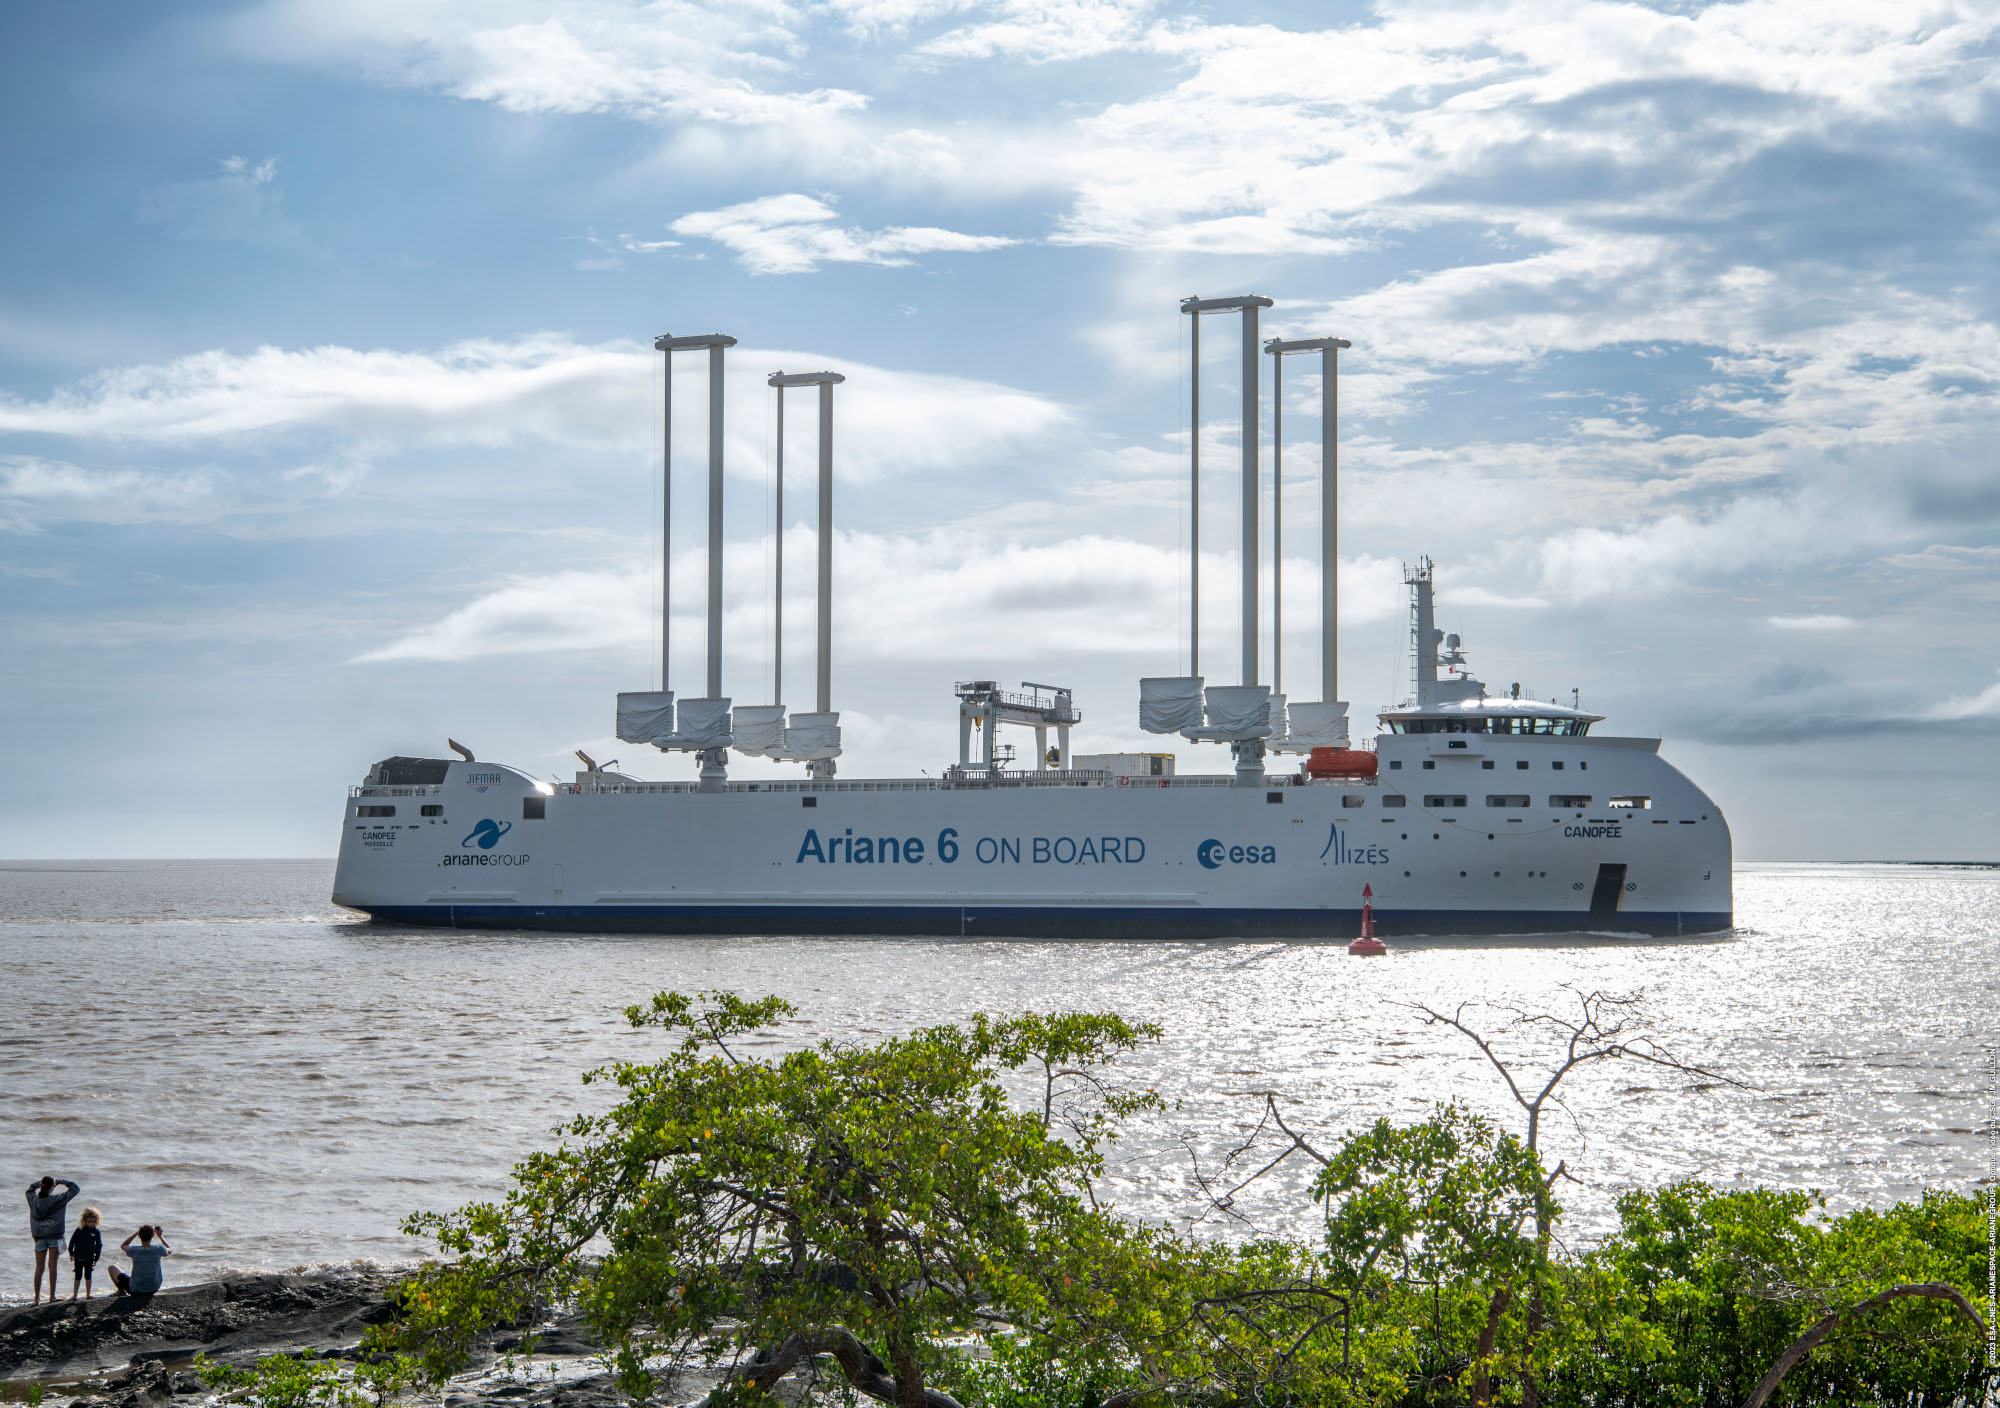 Canopée arriving at French Guiana (credit: AriangeGroup)